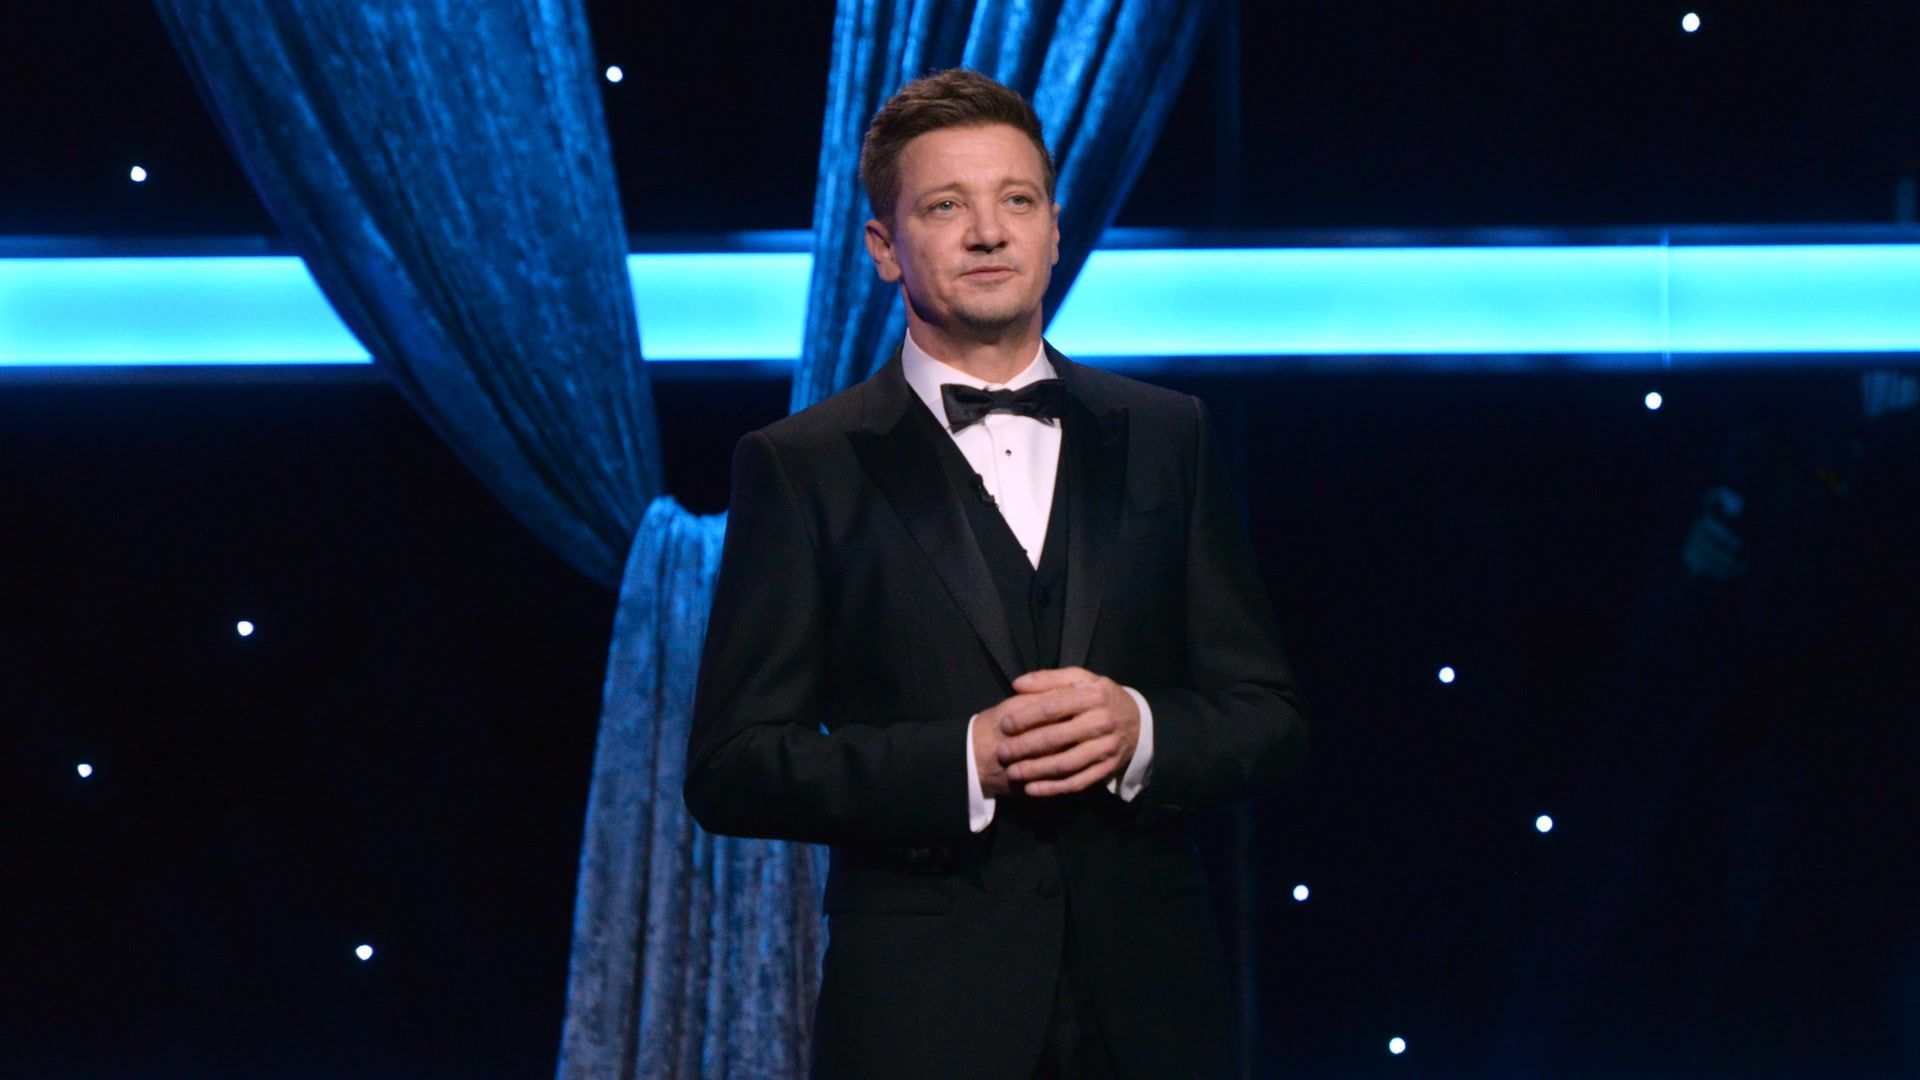 Jeremy Renner in hospital: He can already laugh again